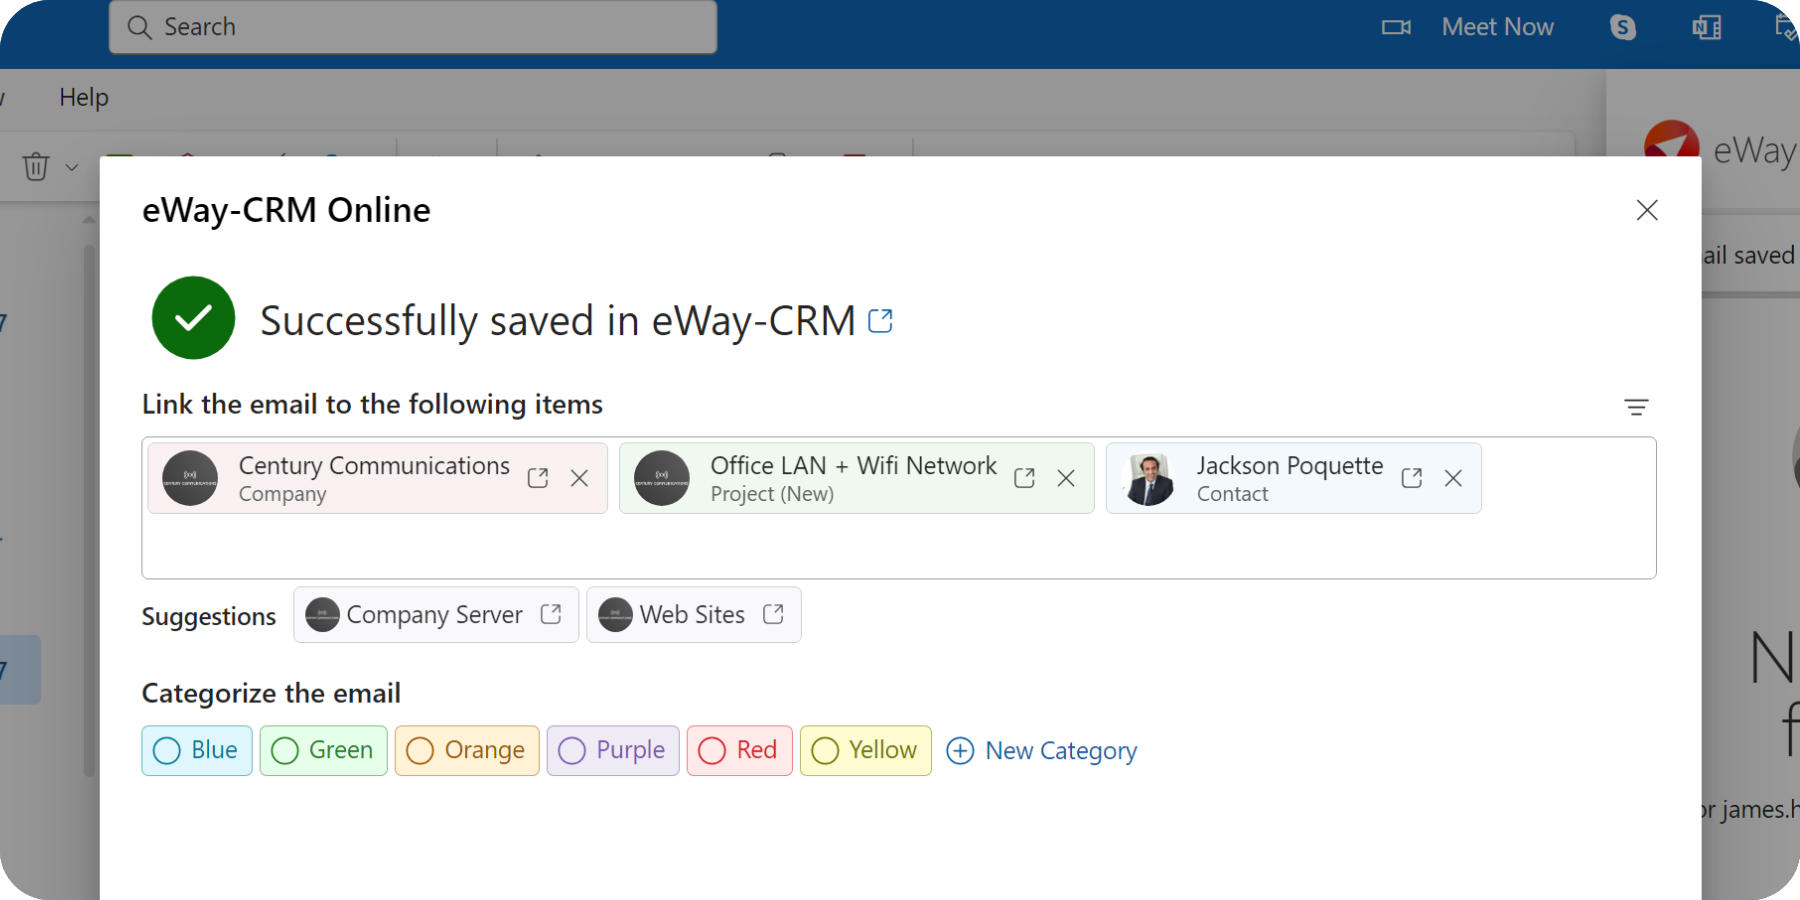 Suggested items in eWay-CRM Online